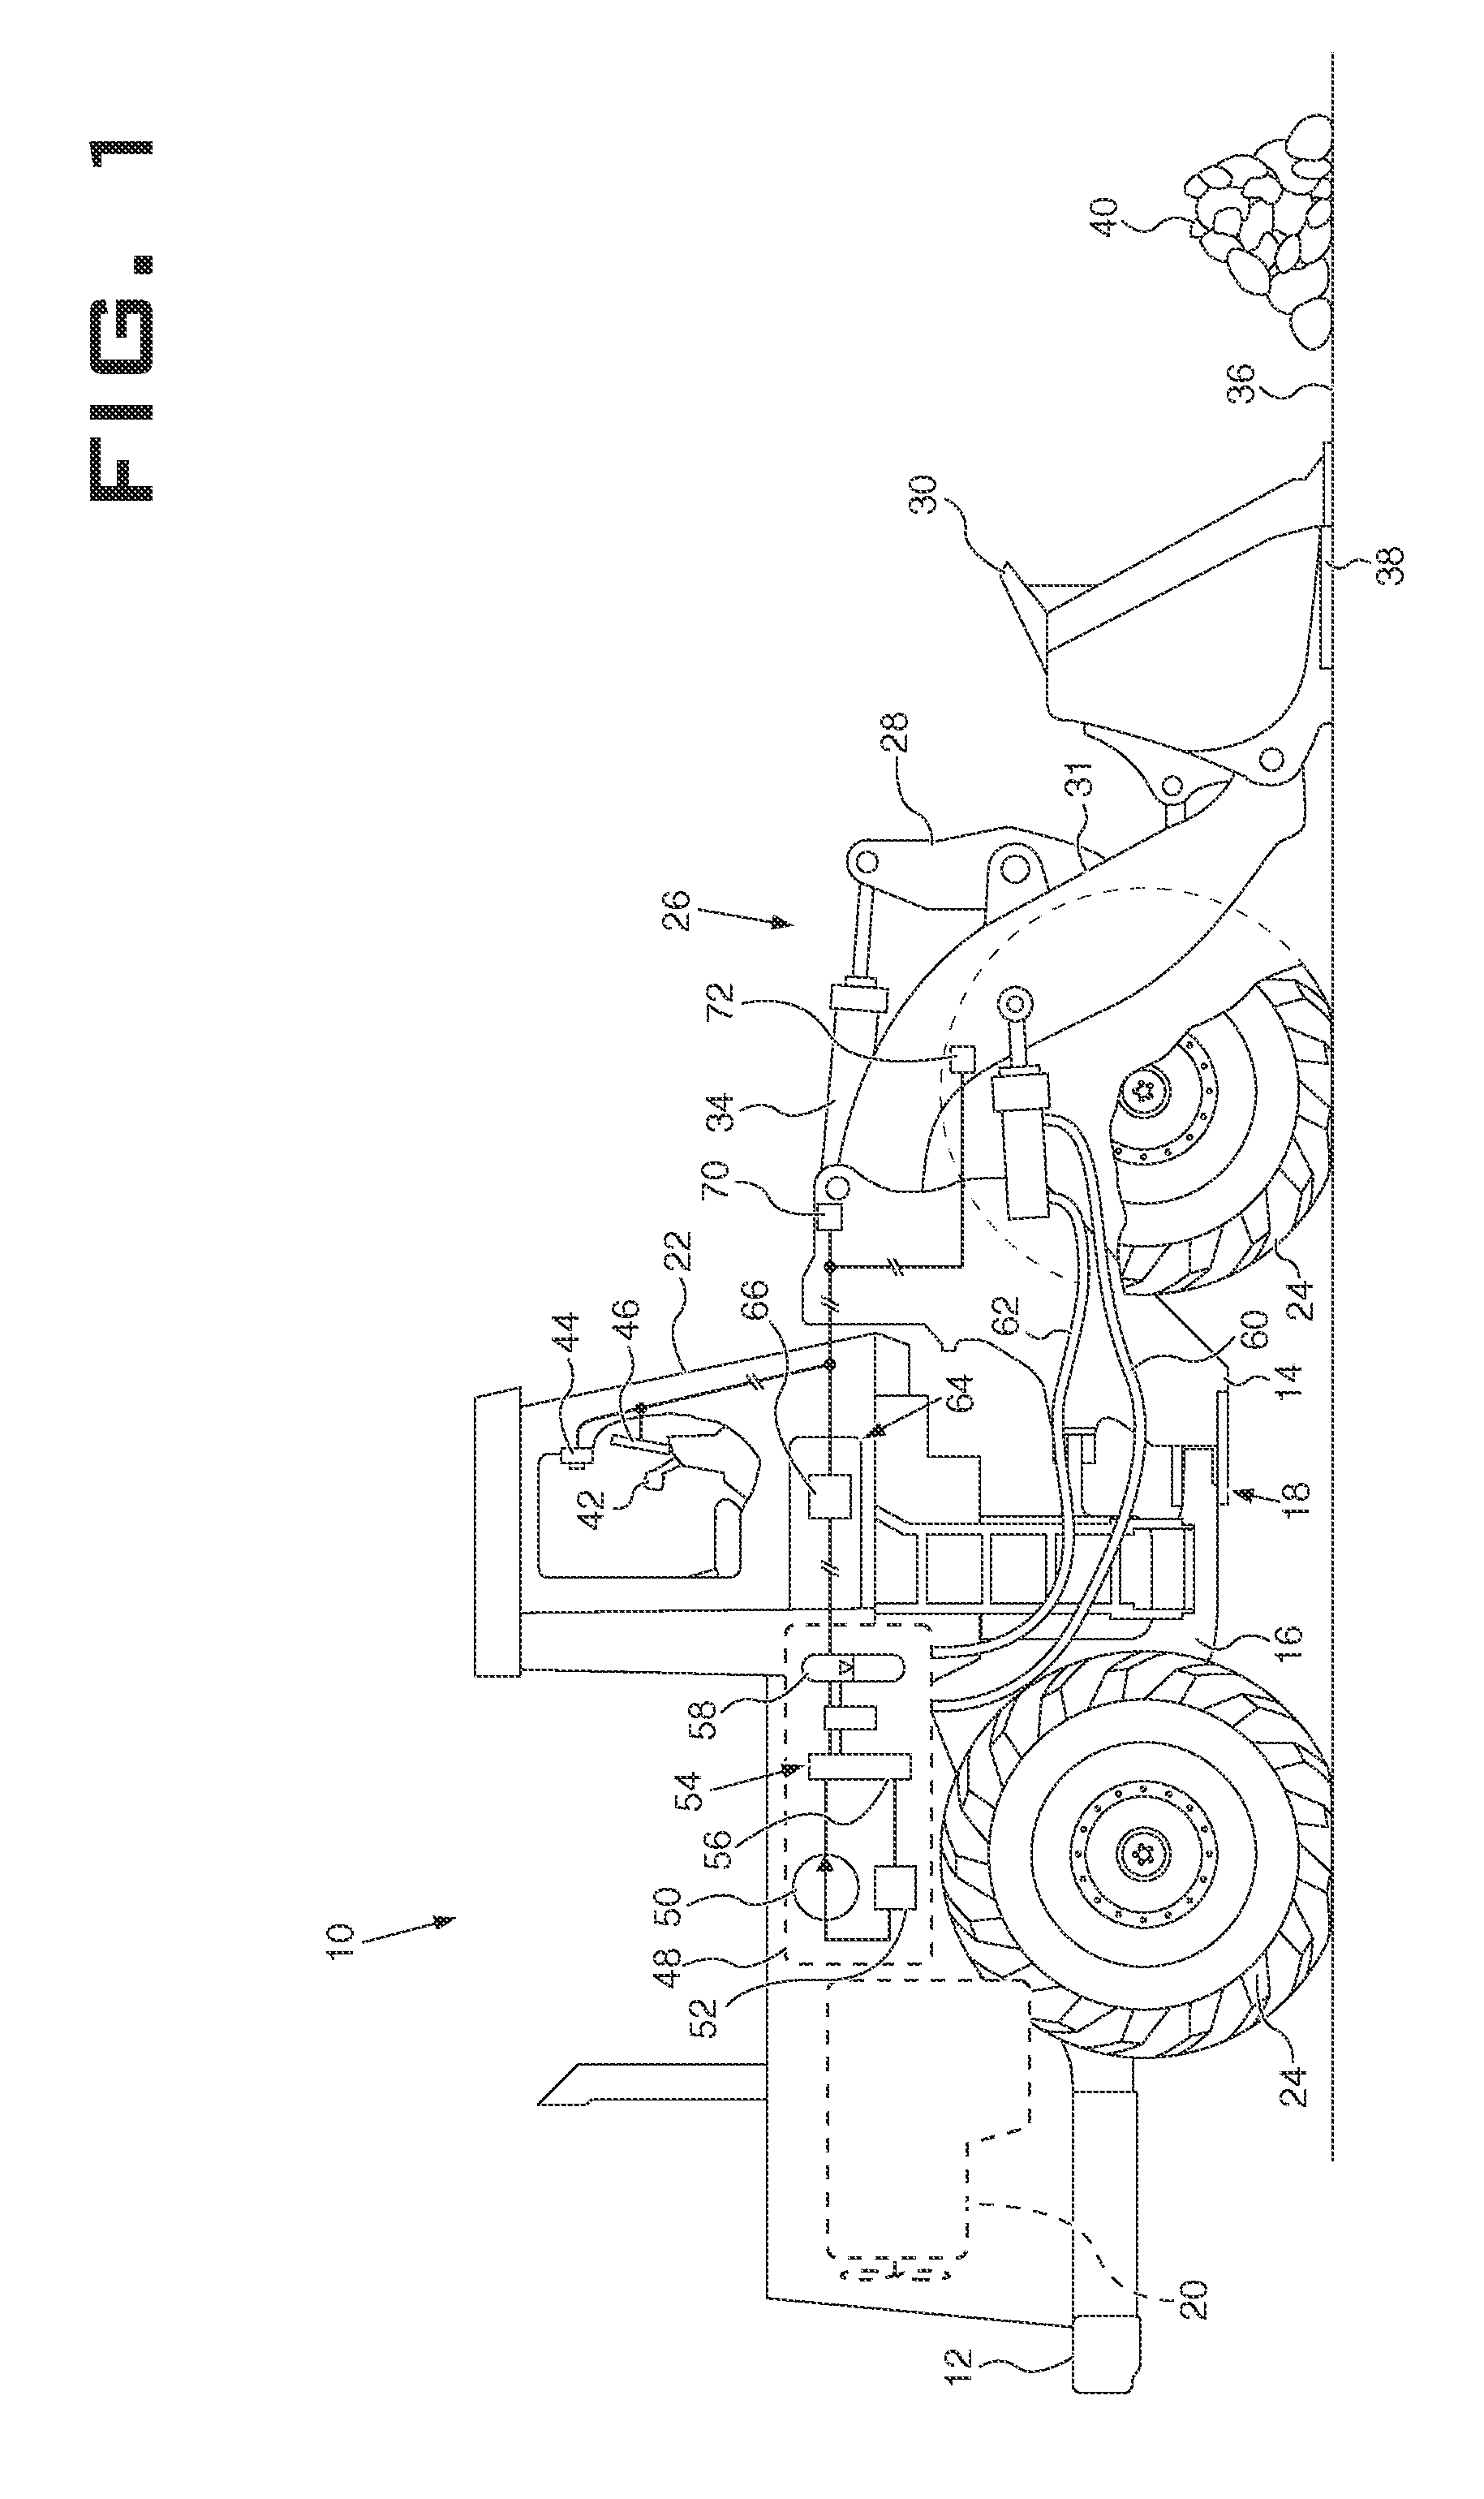 Machine having hydraulically actuated implement system with combined ride control and downforce control system